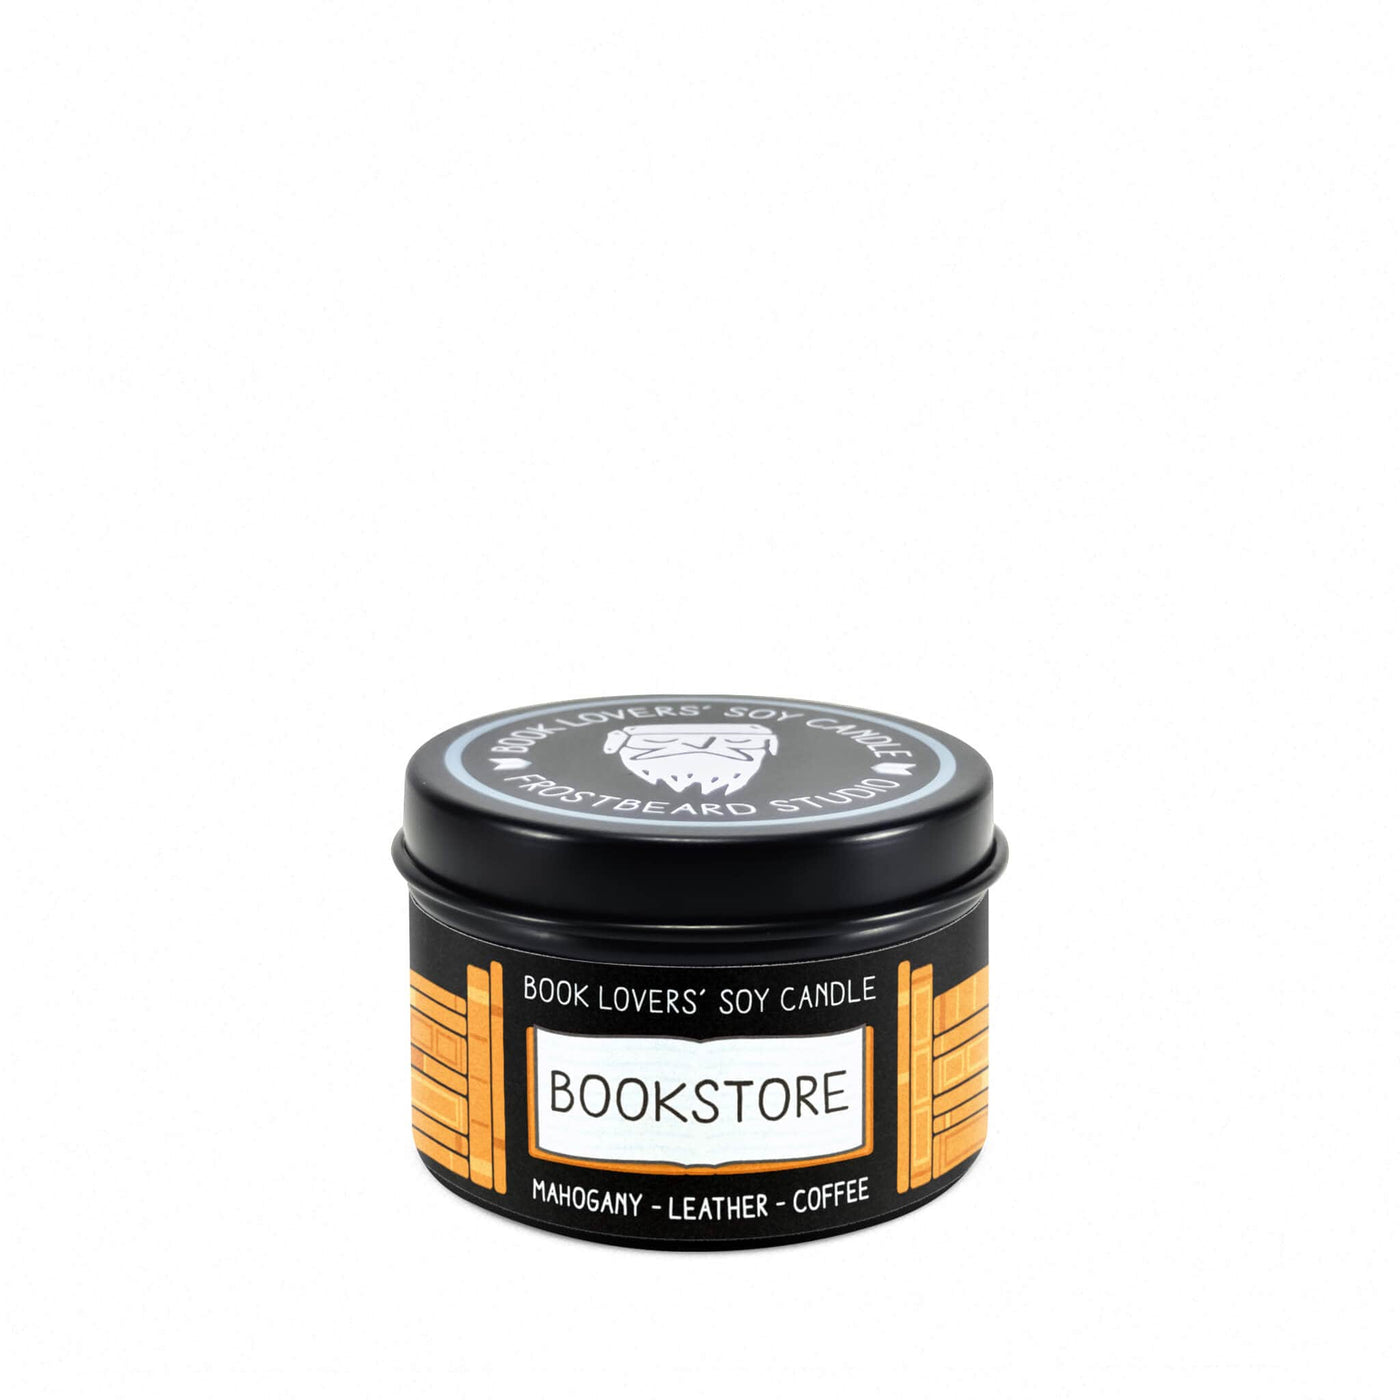 Bookstore - 2 oz Tin - Book Lovers' Soy Candle - Frostbeard Studio